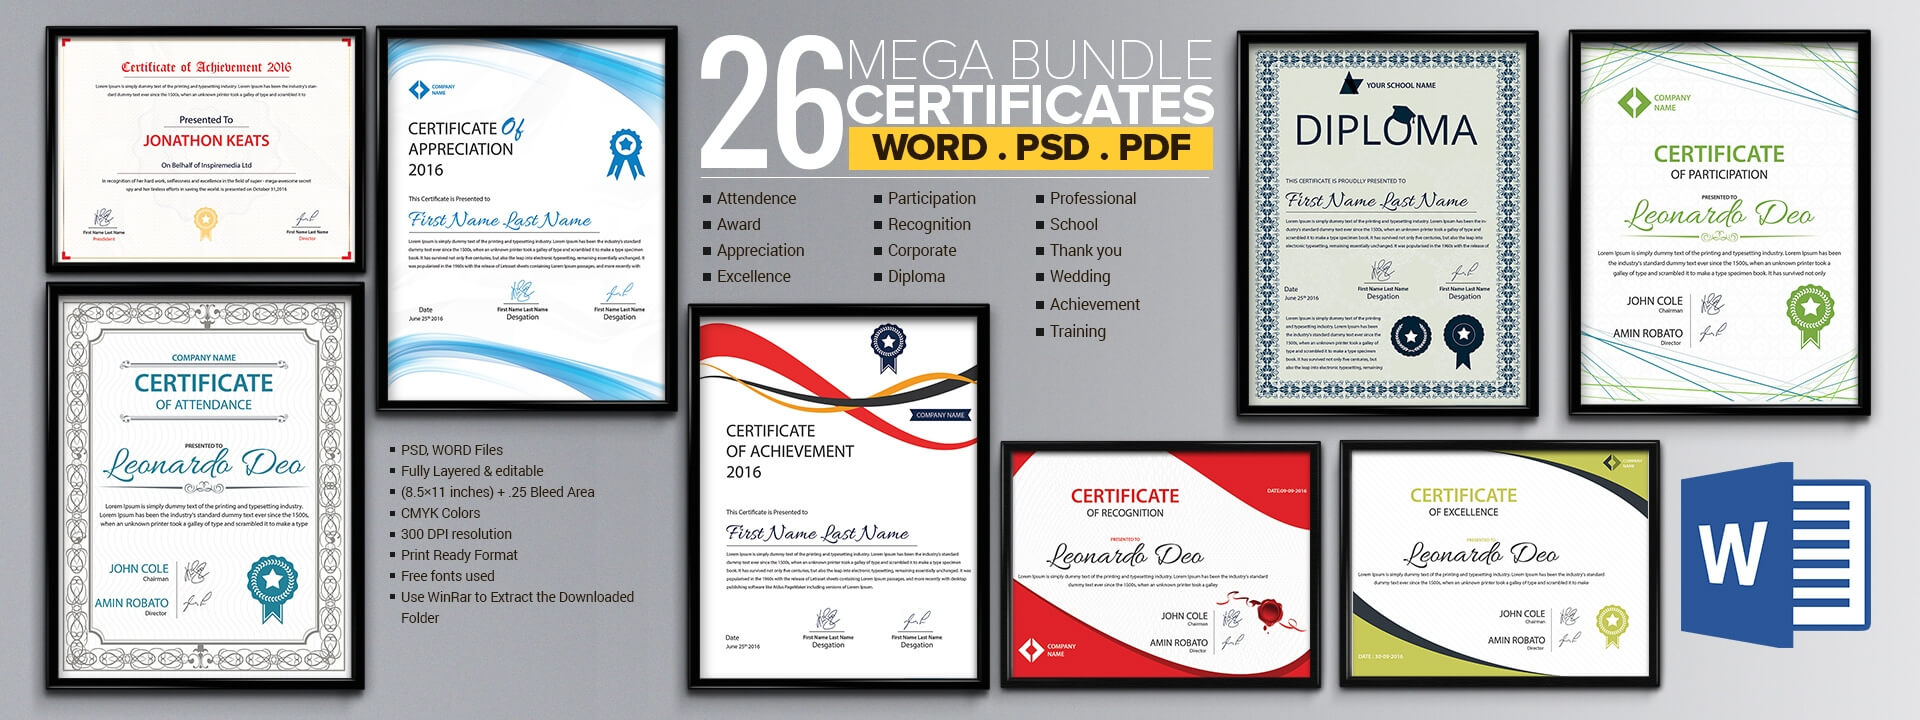 Word Certificate Template – 53+ Free Download Samples Throughout Certificate Templates For Word Free Downloads